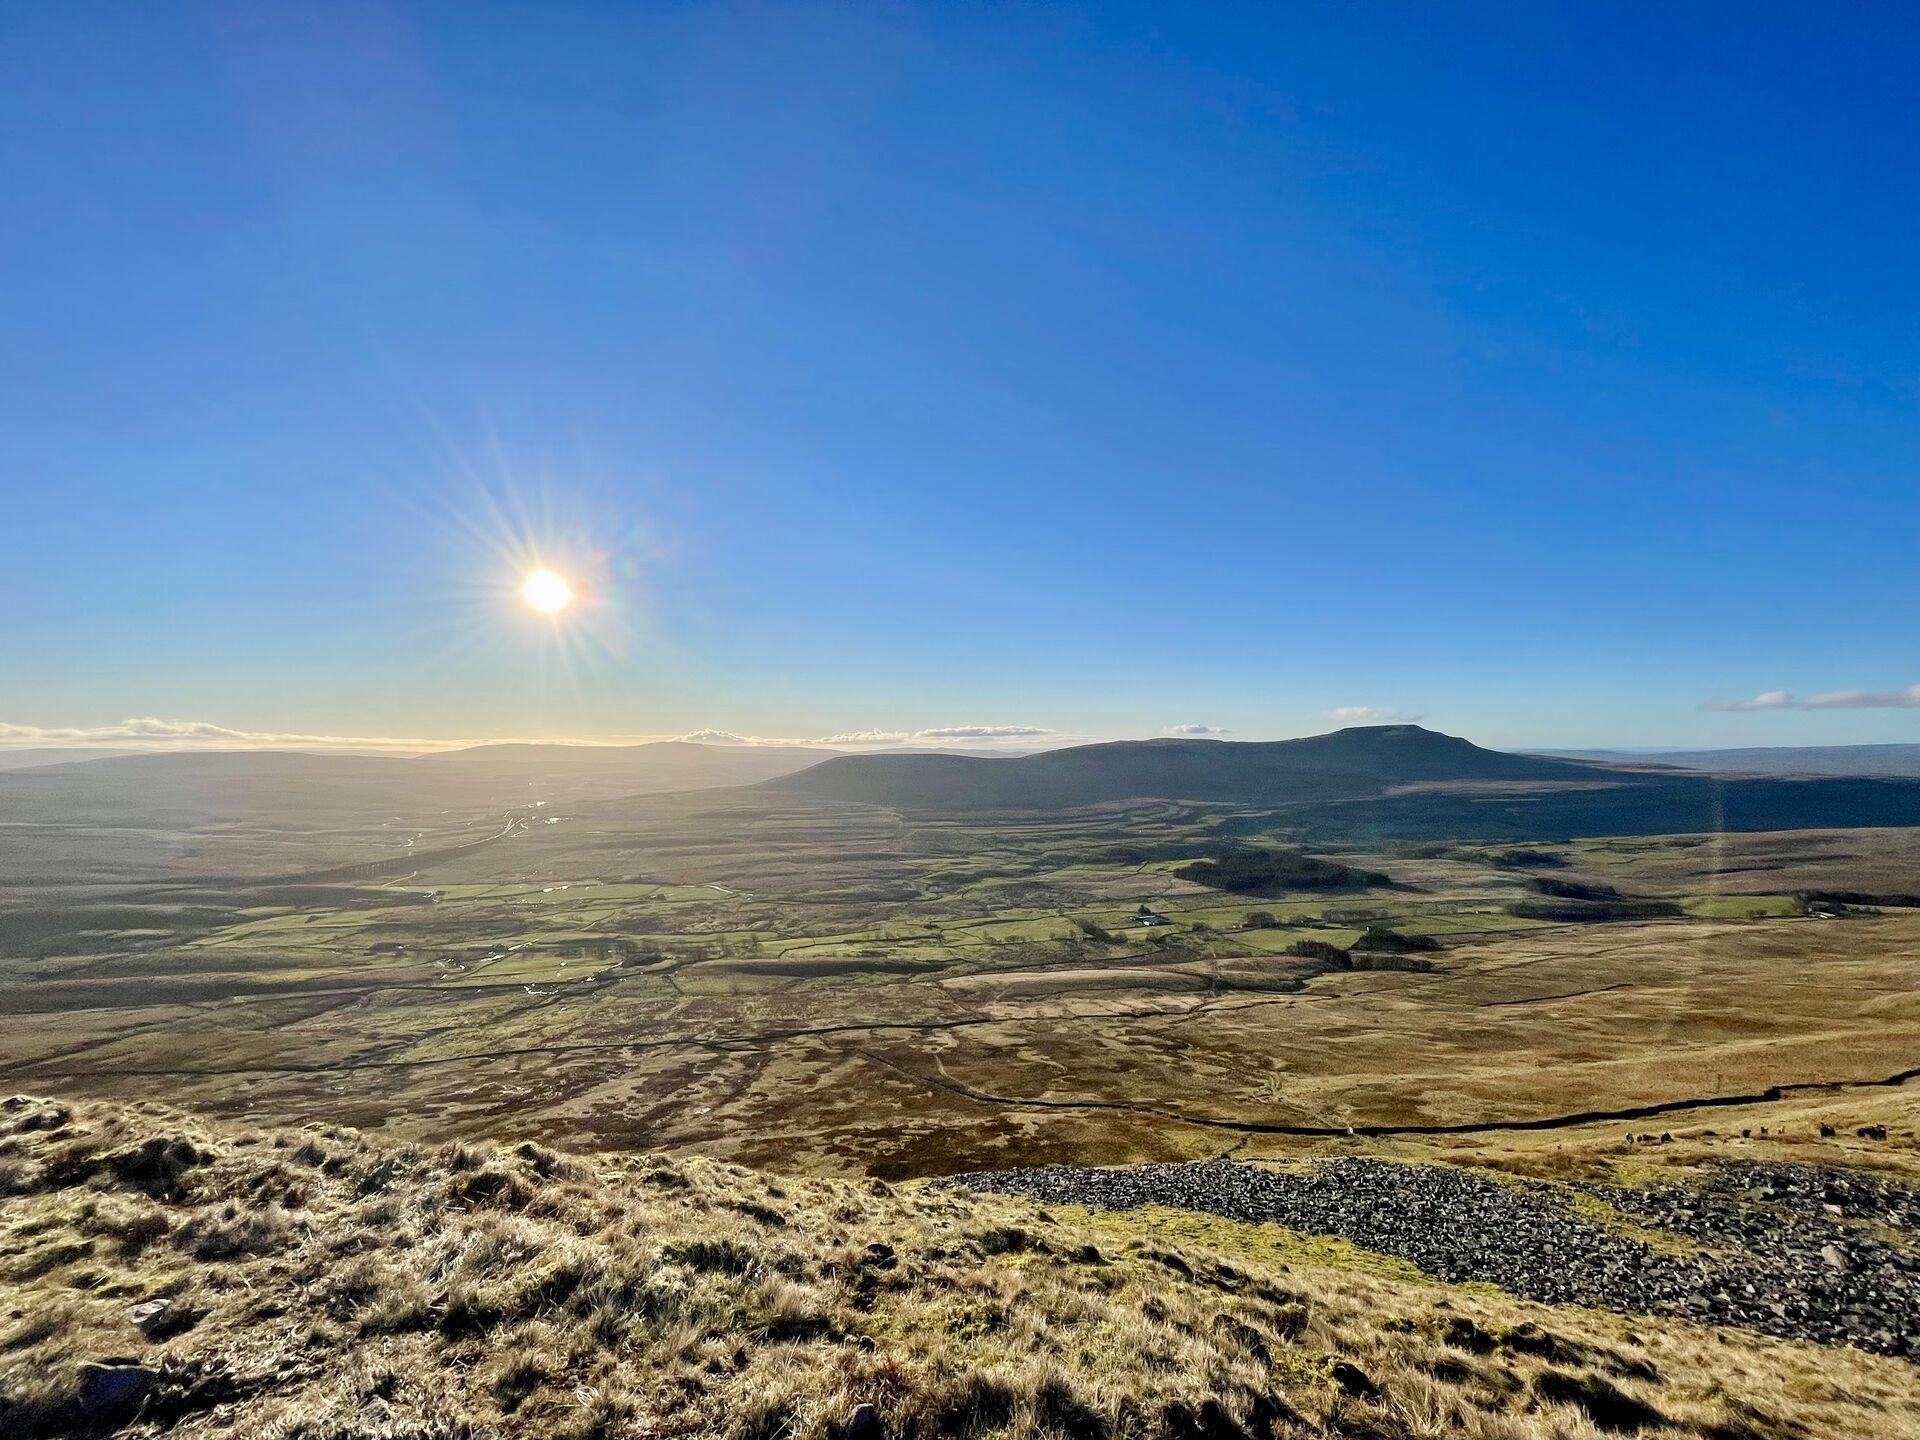 The view from Whernside: Ingleborough at centre right, Whernside behind at centre left, Ribblehead Viaduct at bottom right